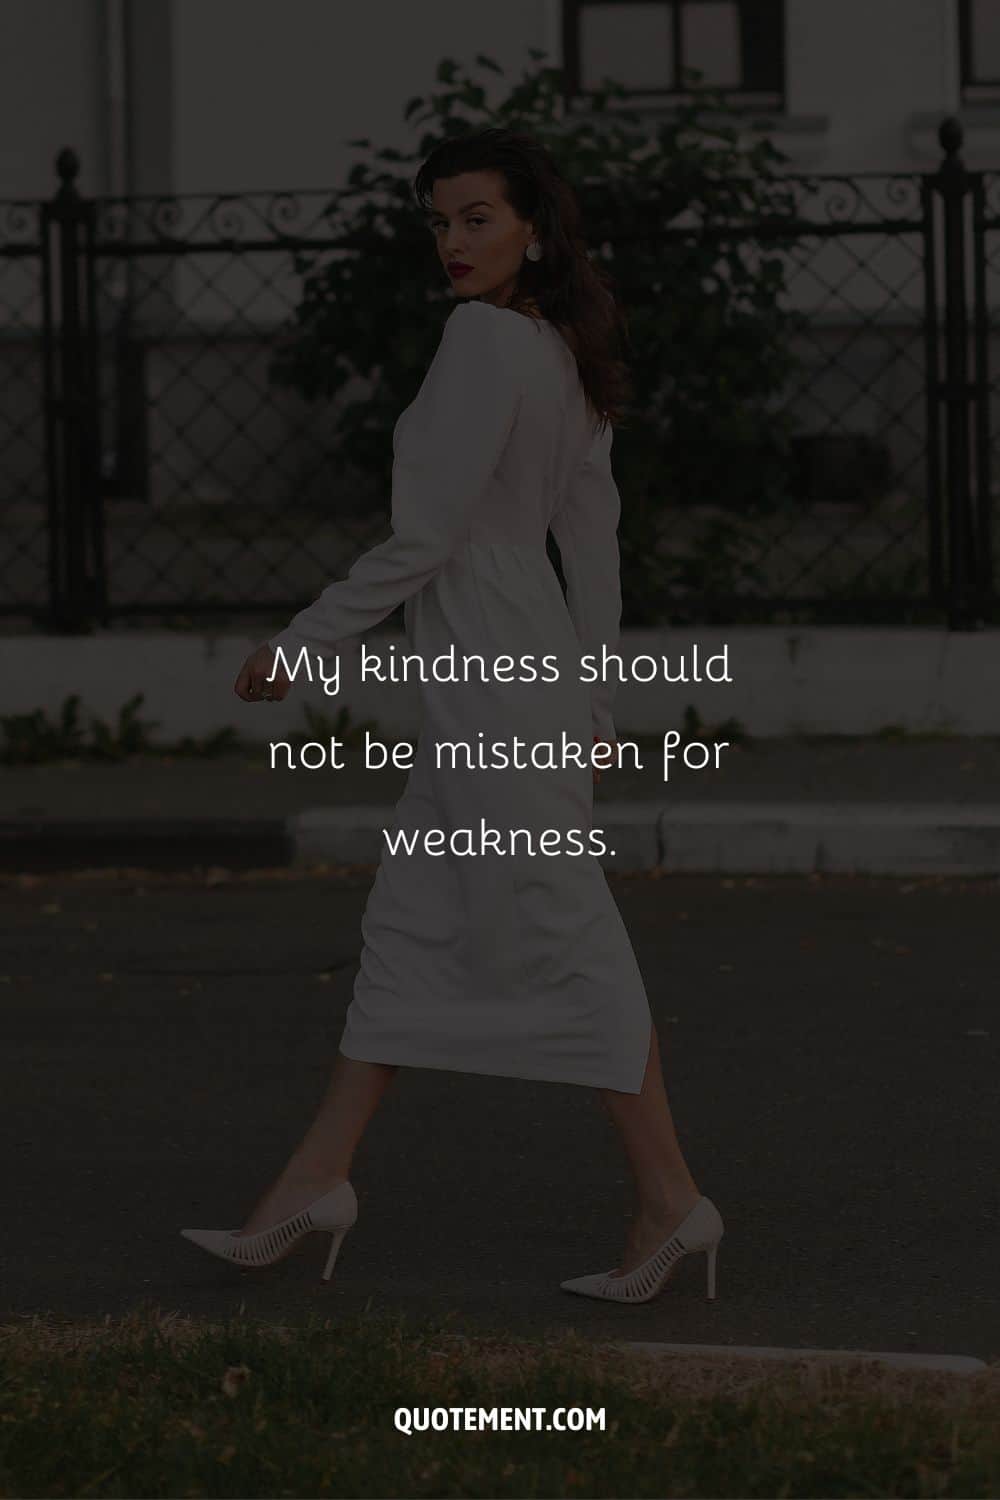 Image of an elegant lady in white representing a caption for bad bitches.